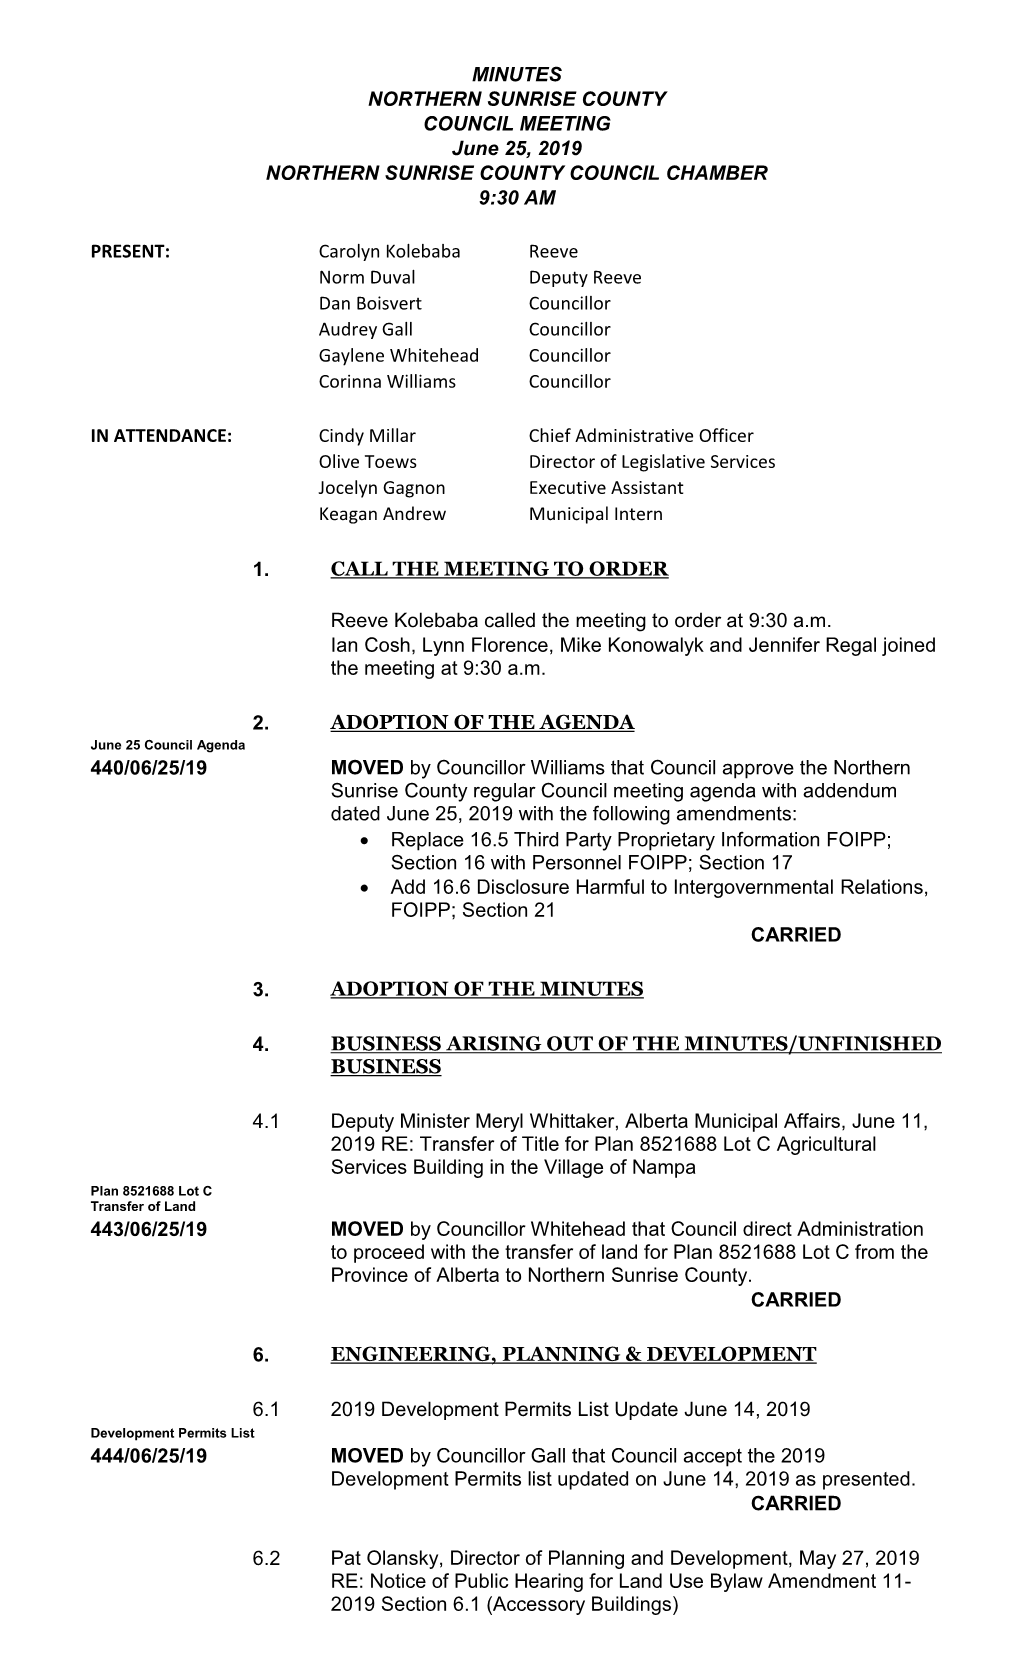 COUNCIL MEETING June 25, 2019 NORTHERN SUNRISE COUNTY COUNCIL CHAMBER 9:30 AM